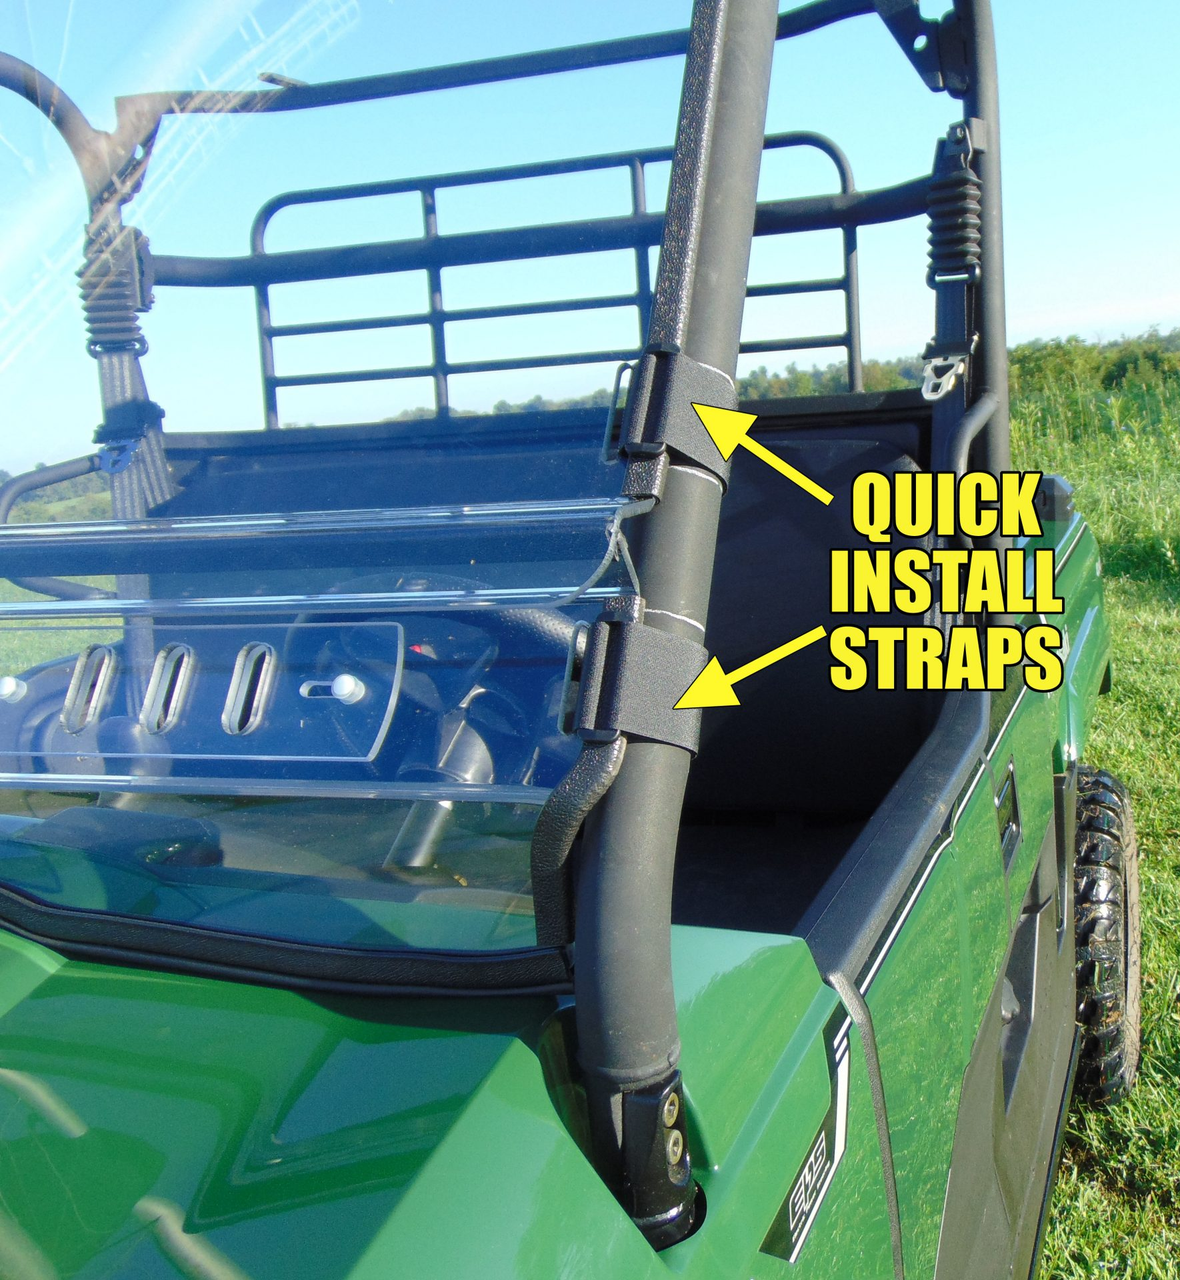 3 Star side x side accessories Yamaha YXZ 1000R 1 piece windshield quick install straps